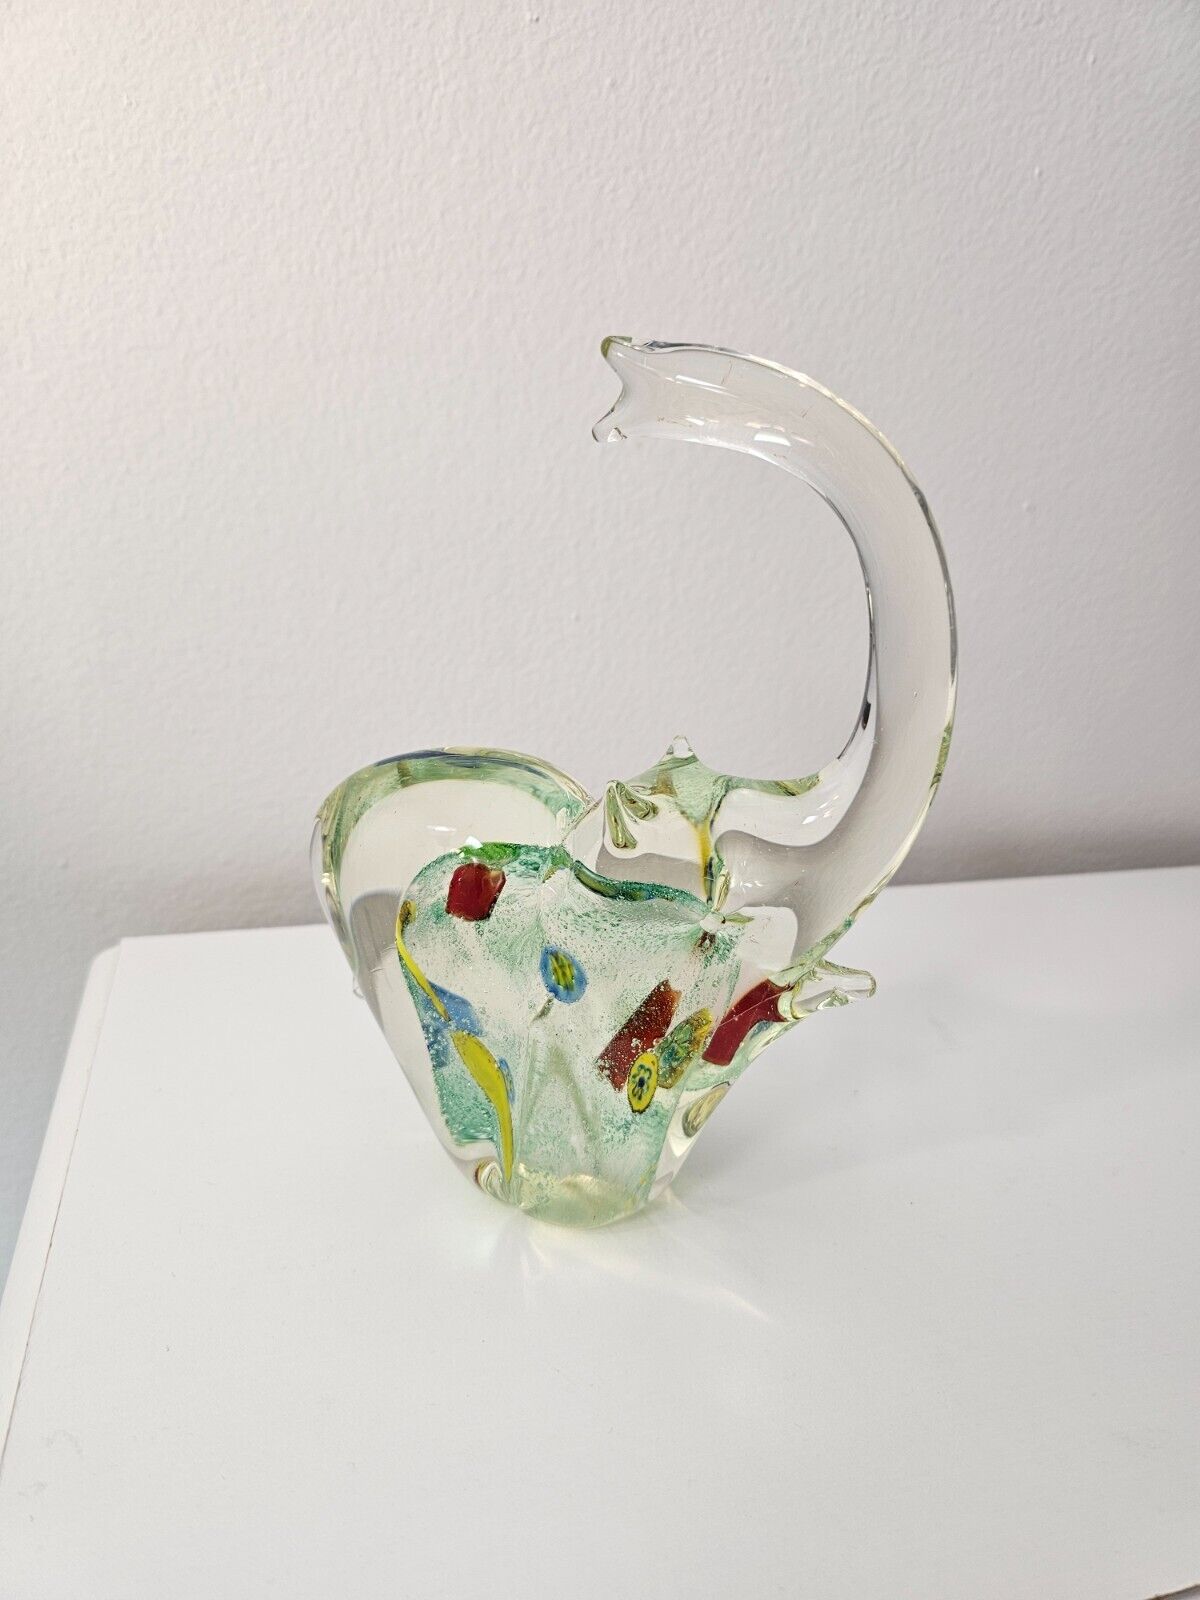 Glass Elephant figurine 6x8 Excellent condition Very Nice